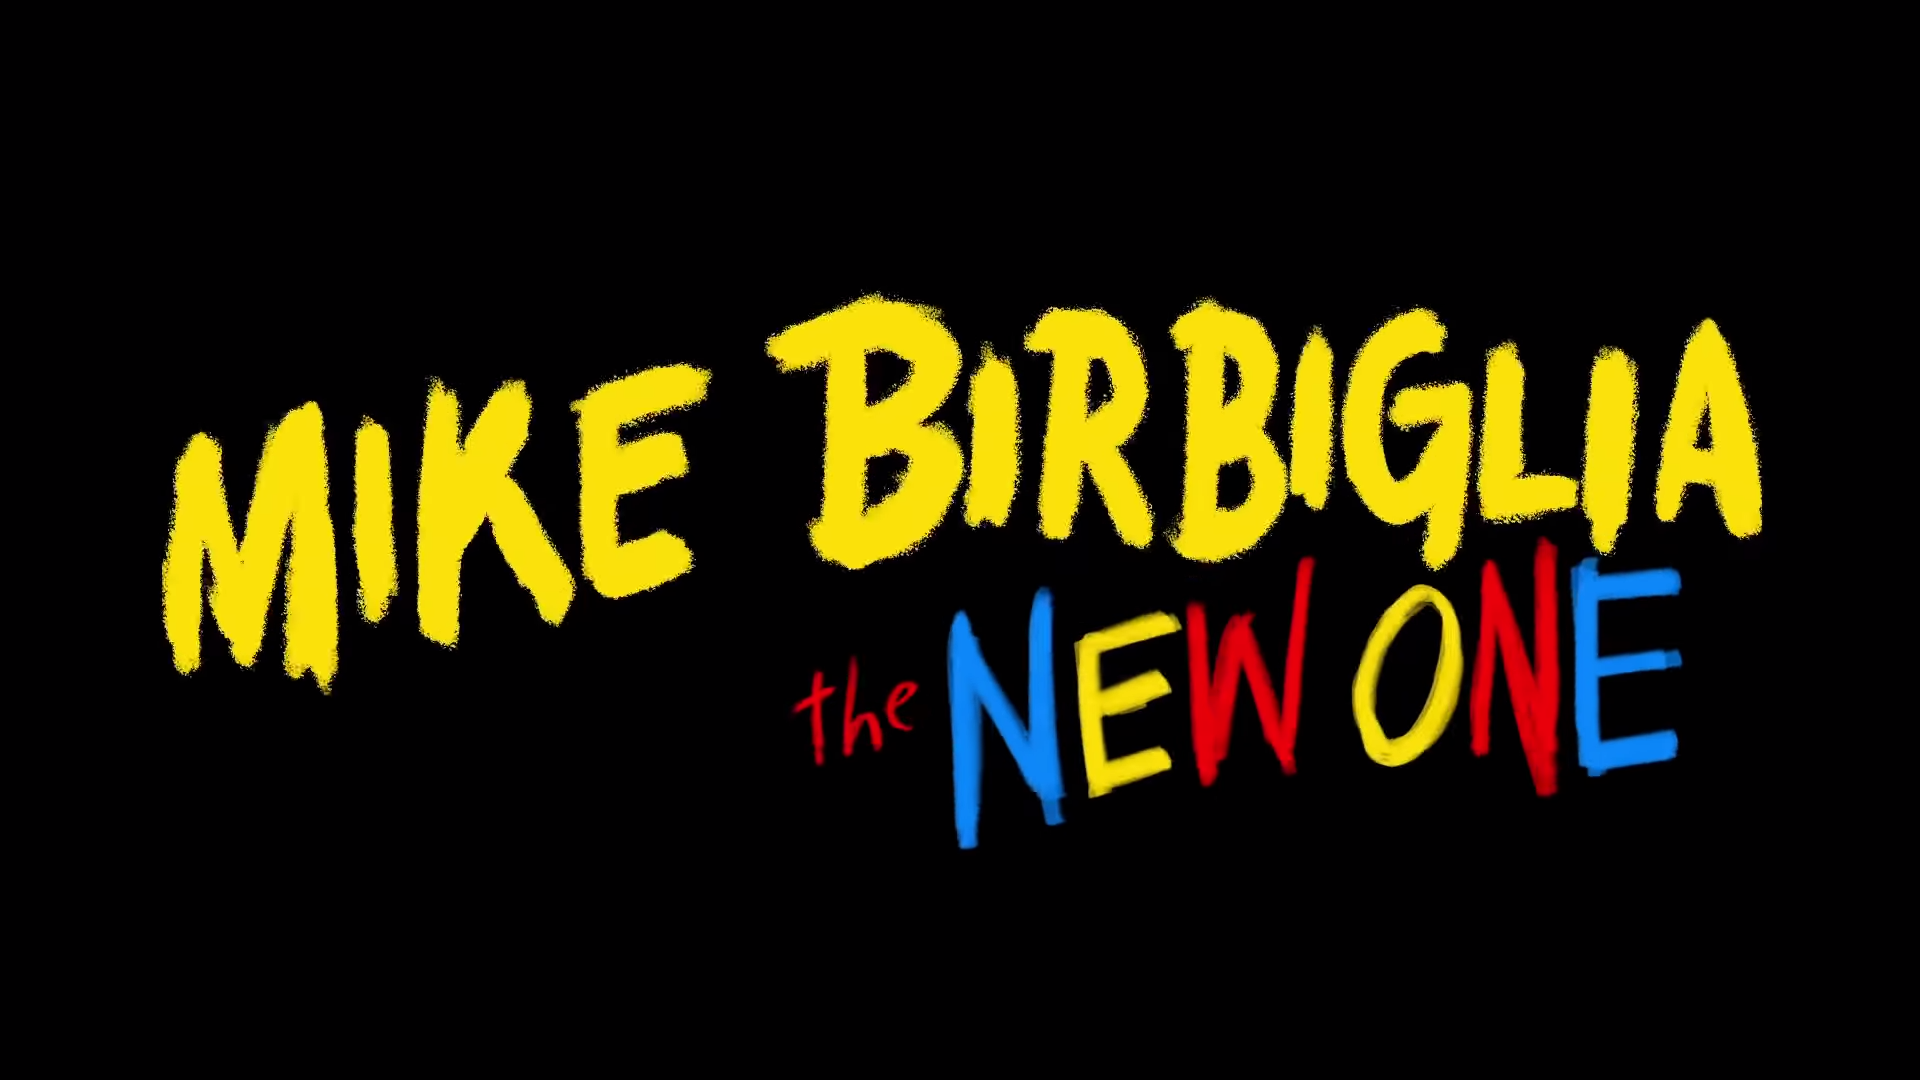 Mike Birbiglia The New One [TRAILER] Coming to Netflix November 26, 2019